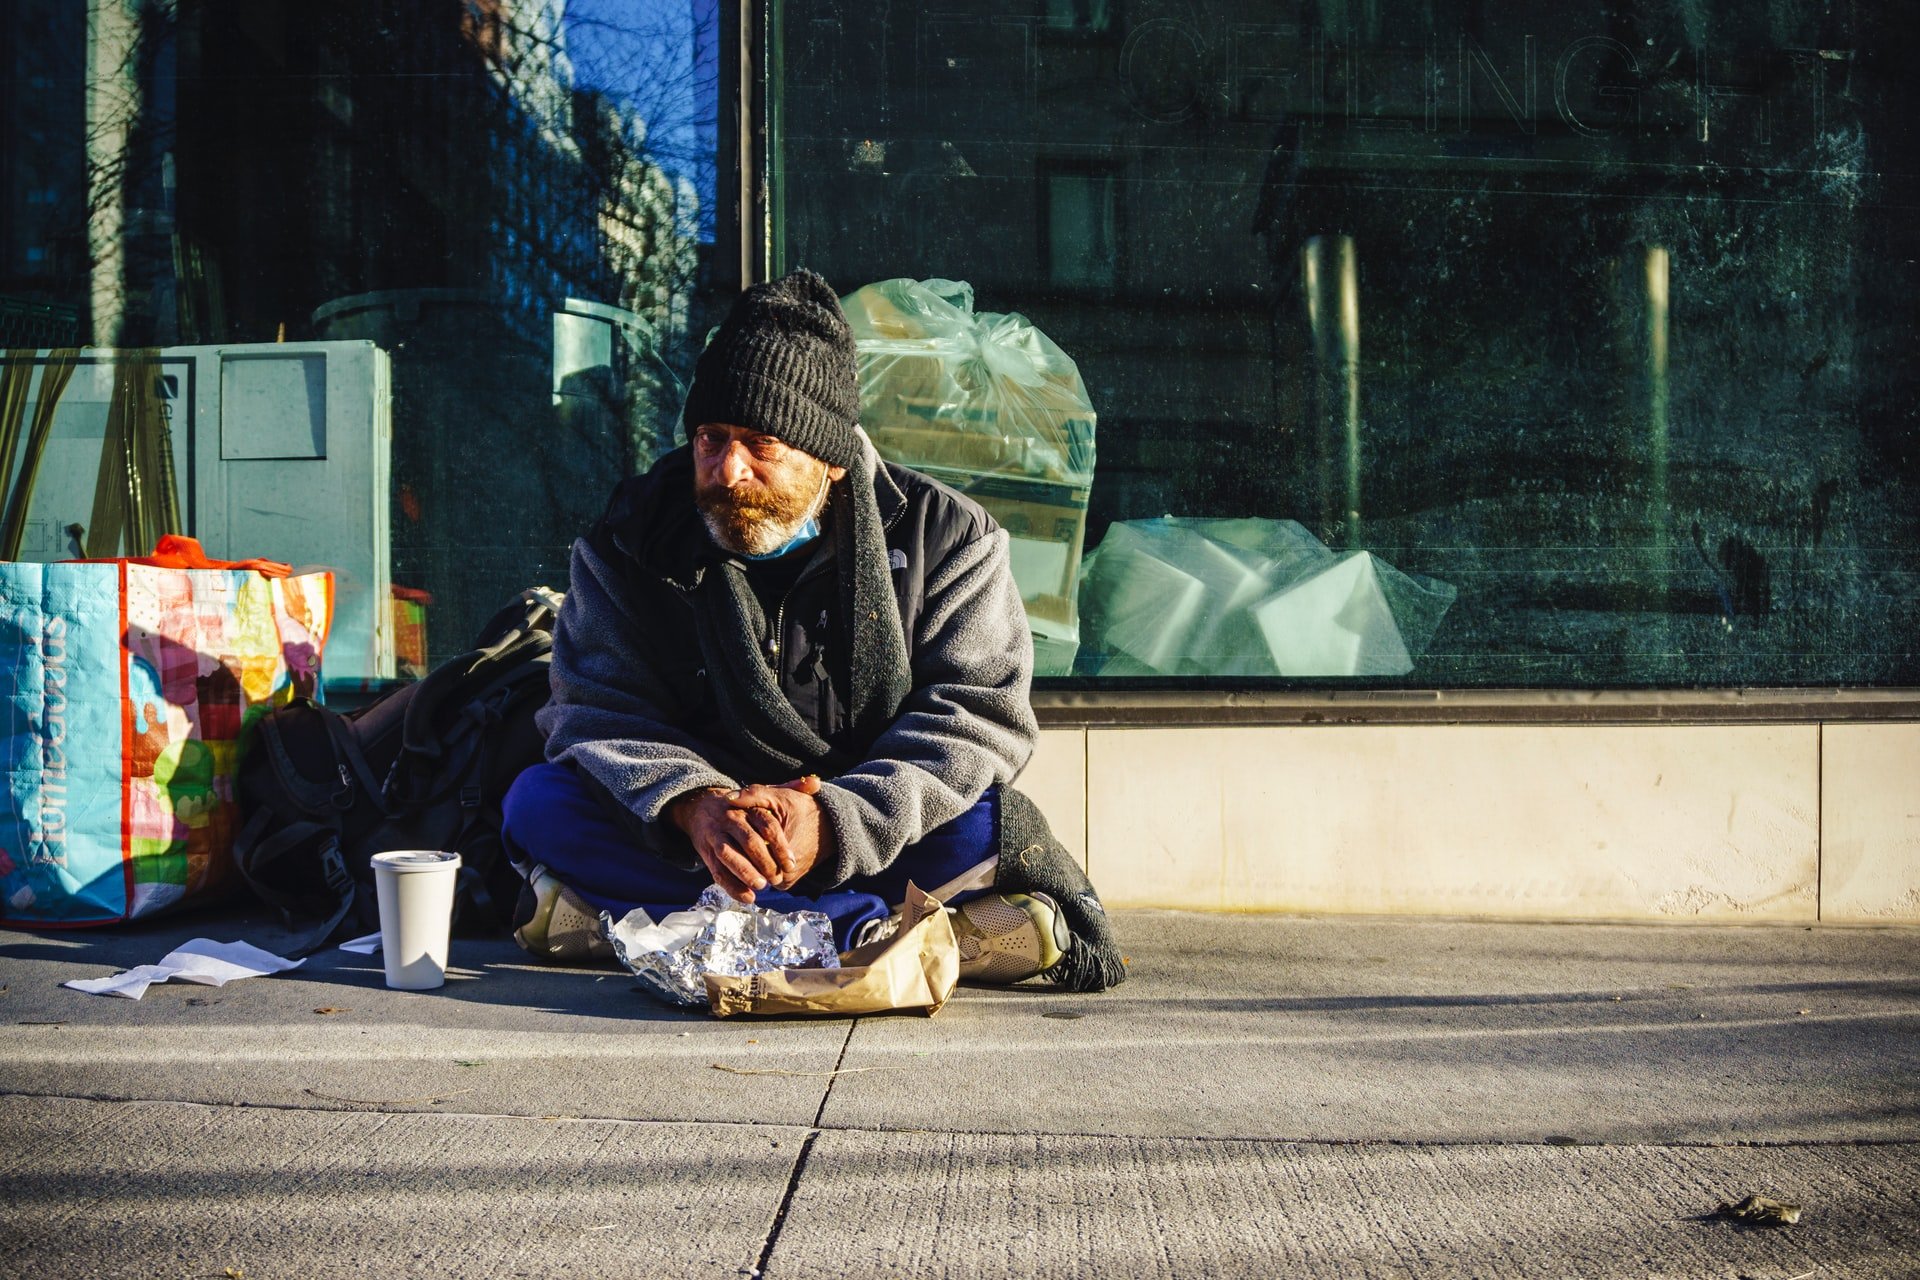 He met many interesting people while living on the streets | Source: Unsplash